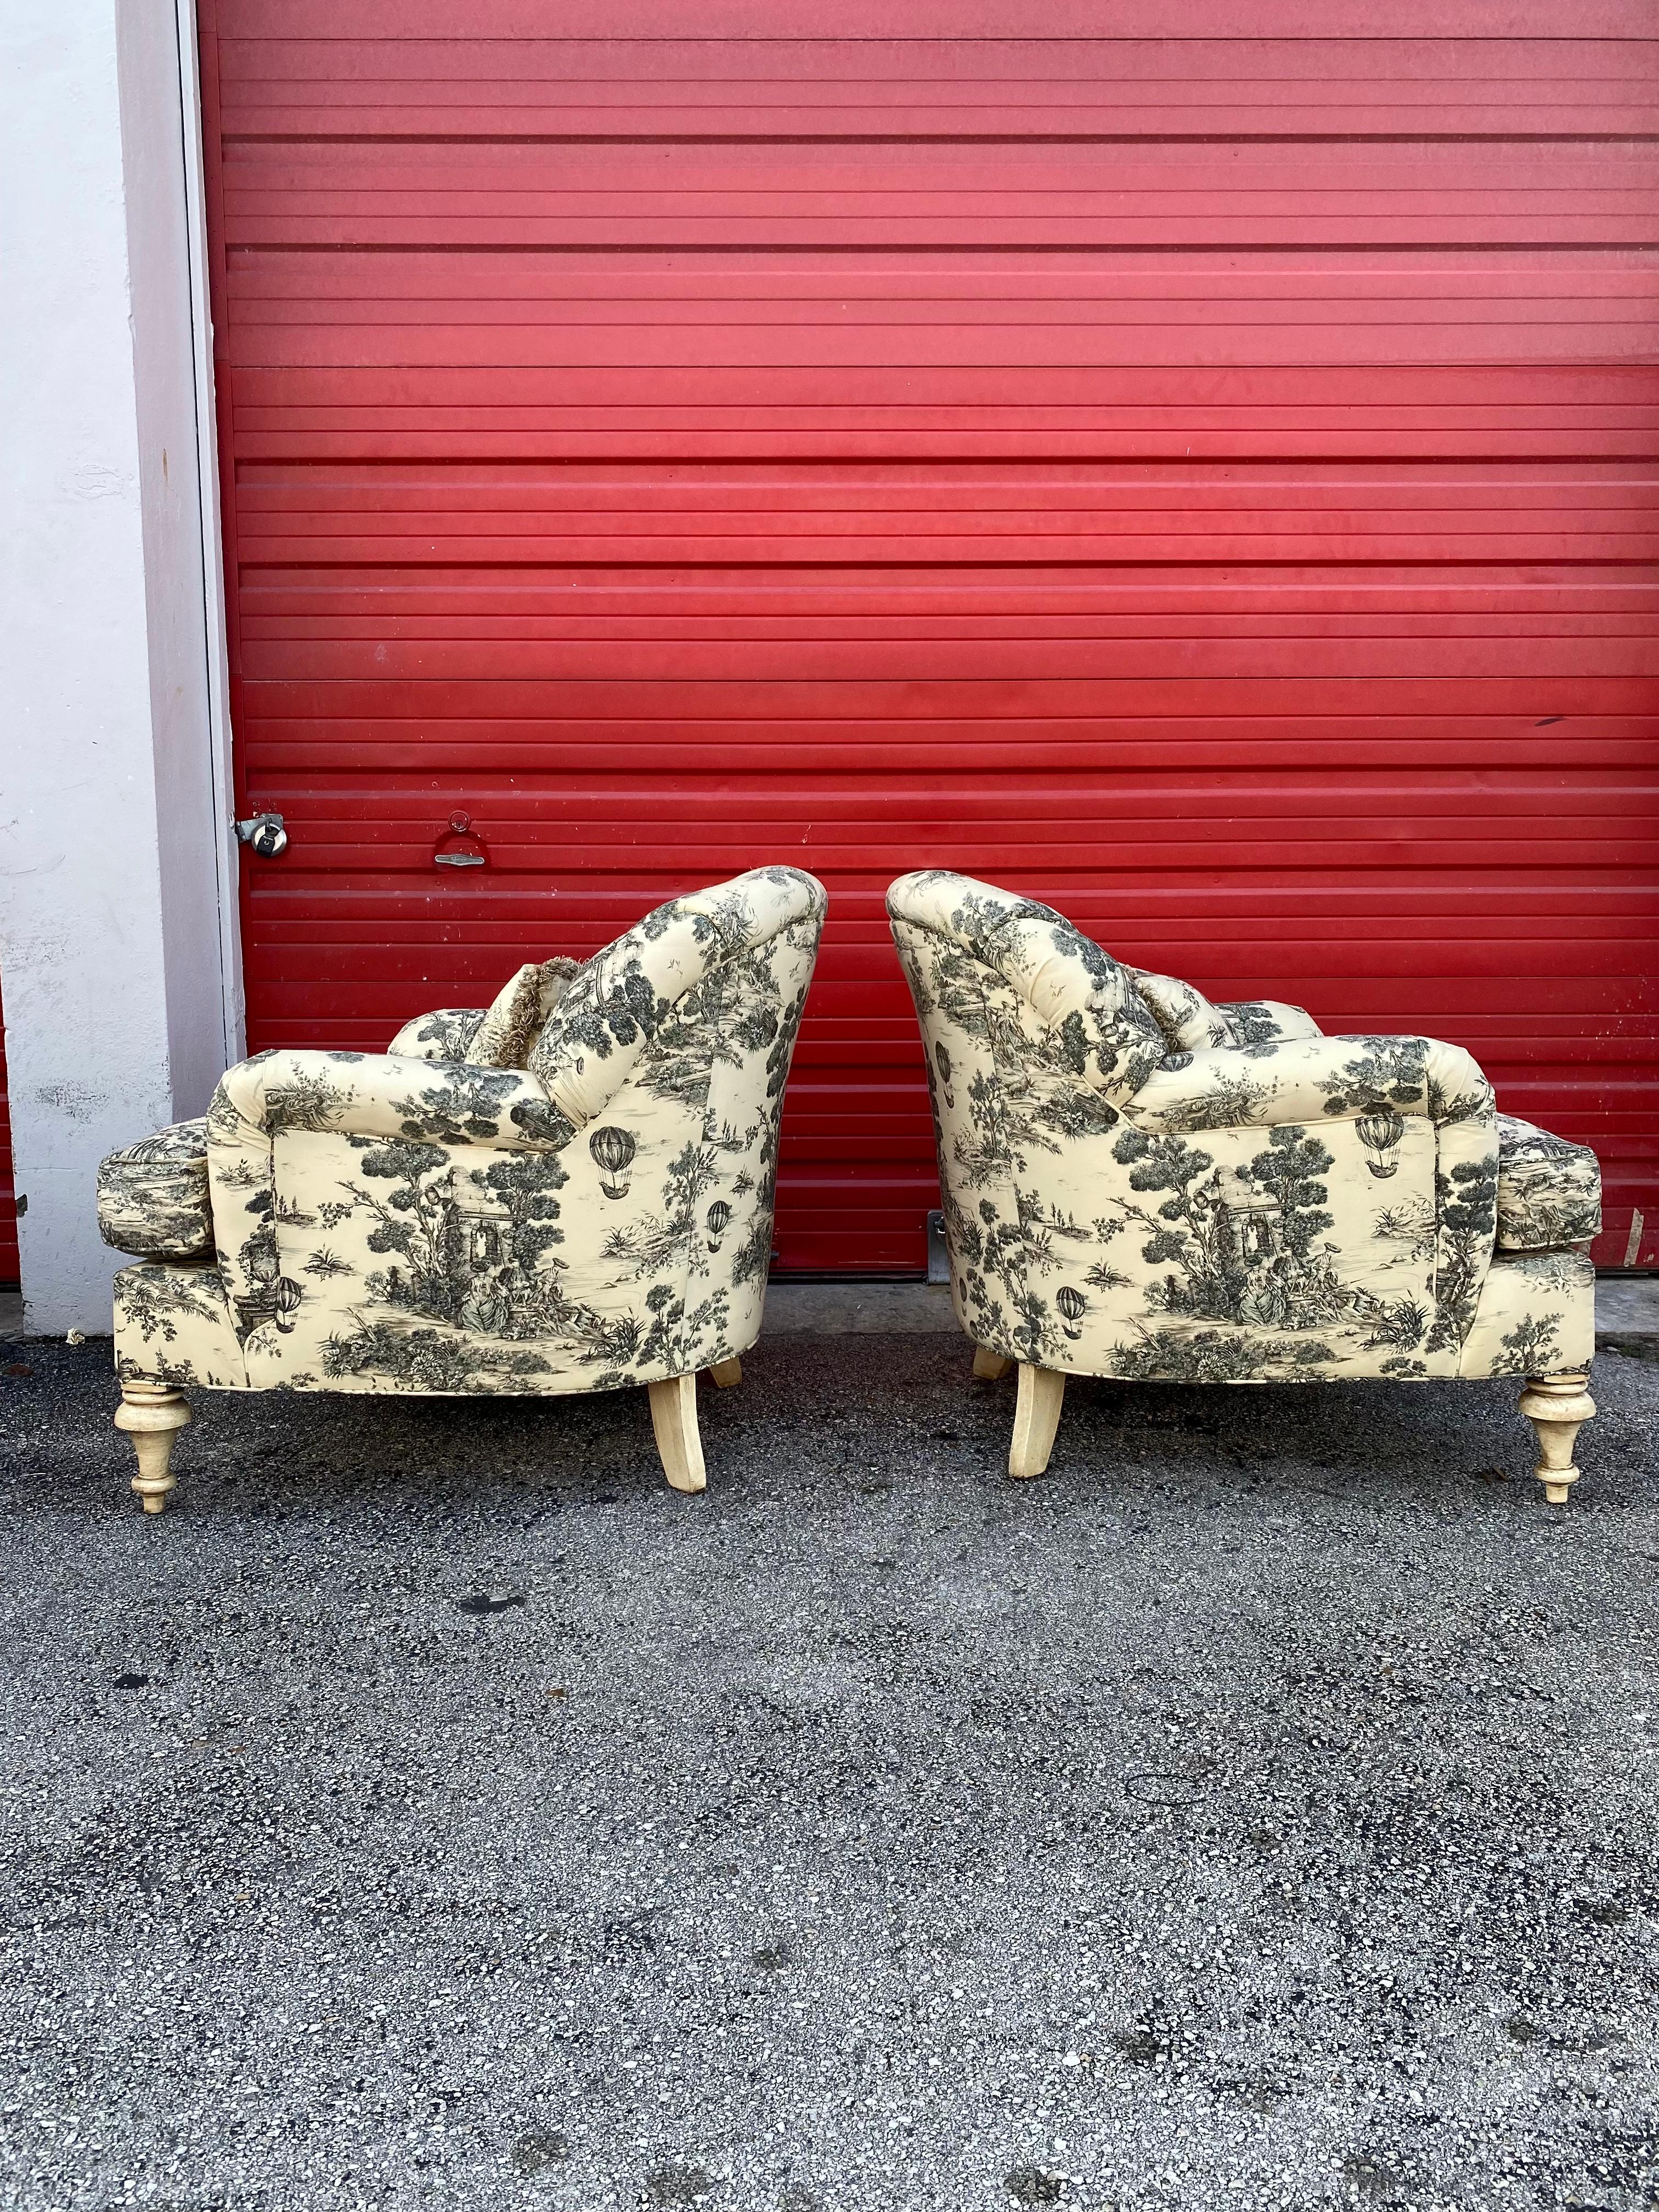 Contemporary C.R. Laine Chinoiserie Tufted English Arm Chairs, Set of 2 For Sale